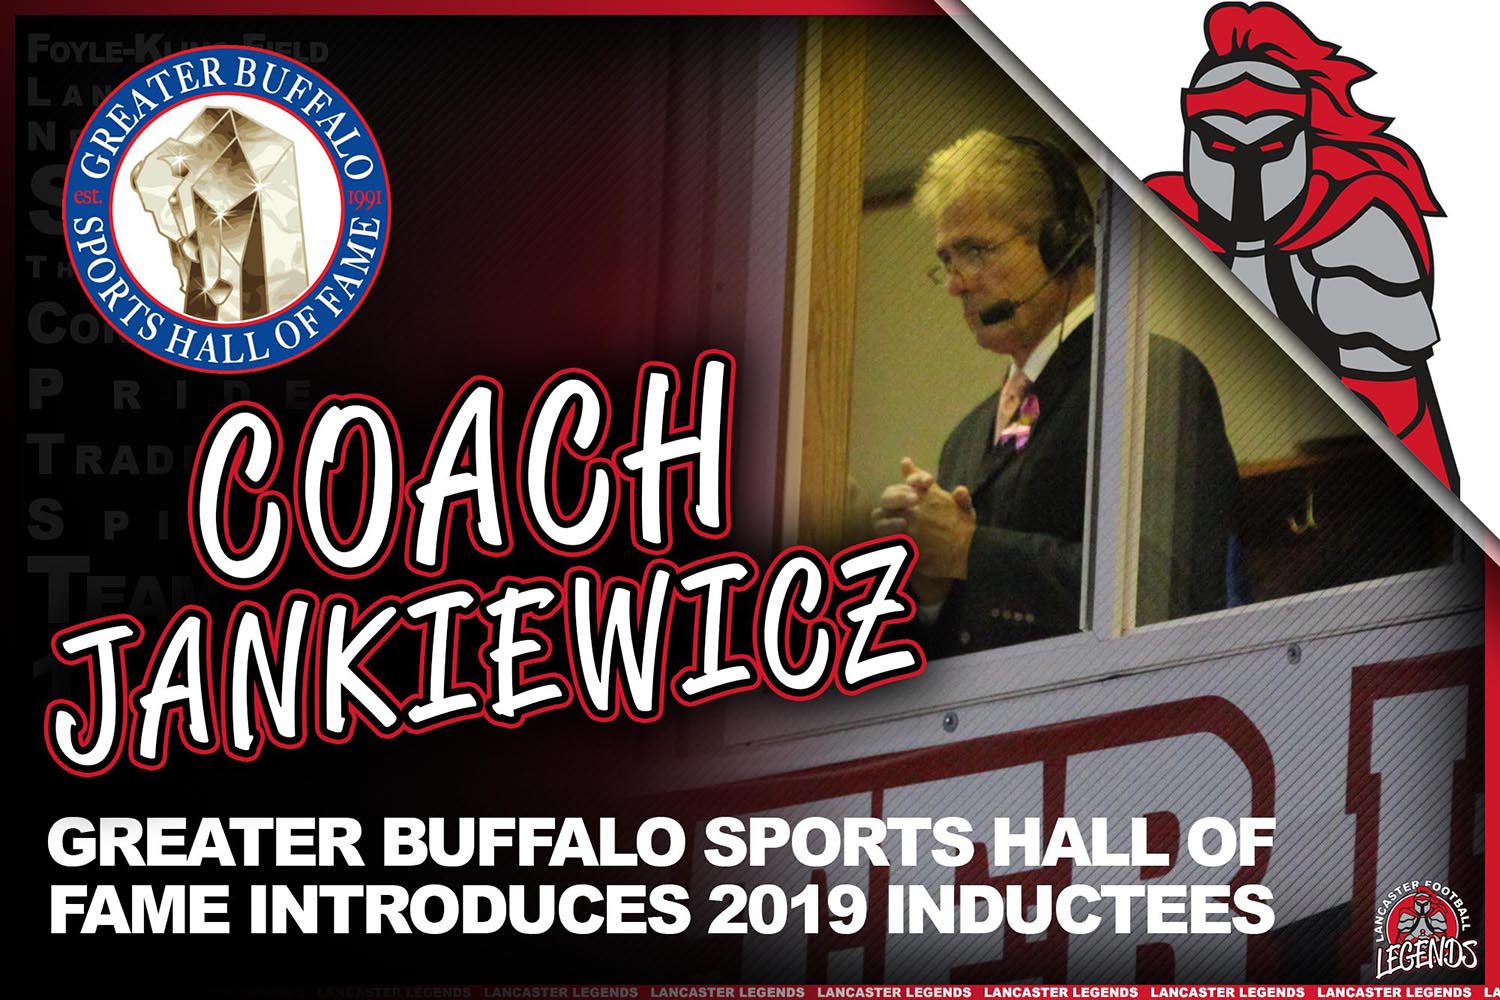 Greater Buffalo Sports Hall of Fame Introduces 2019 Inductees